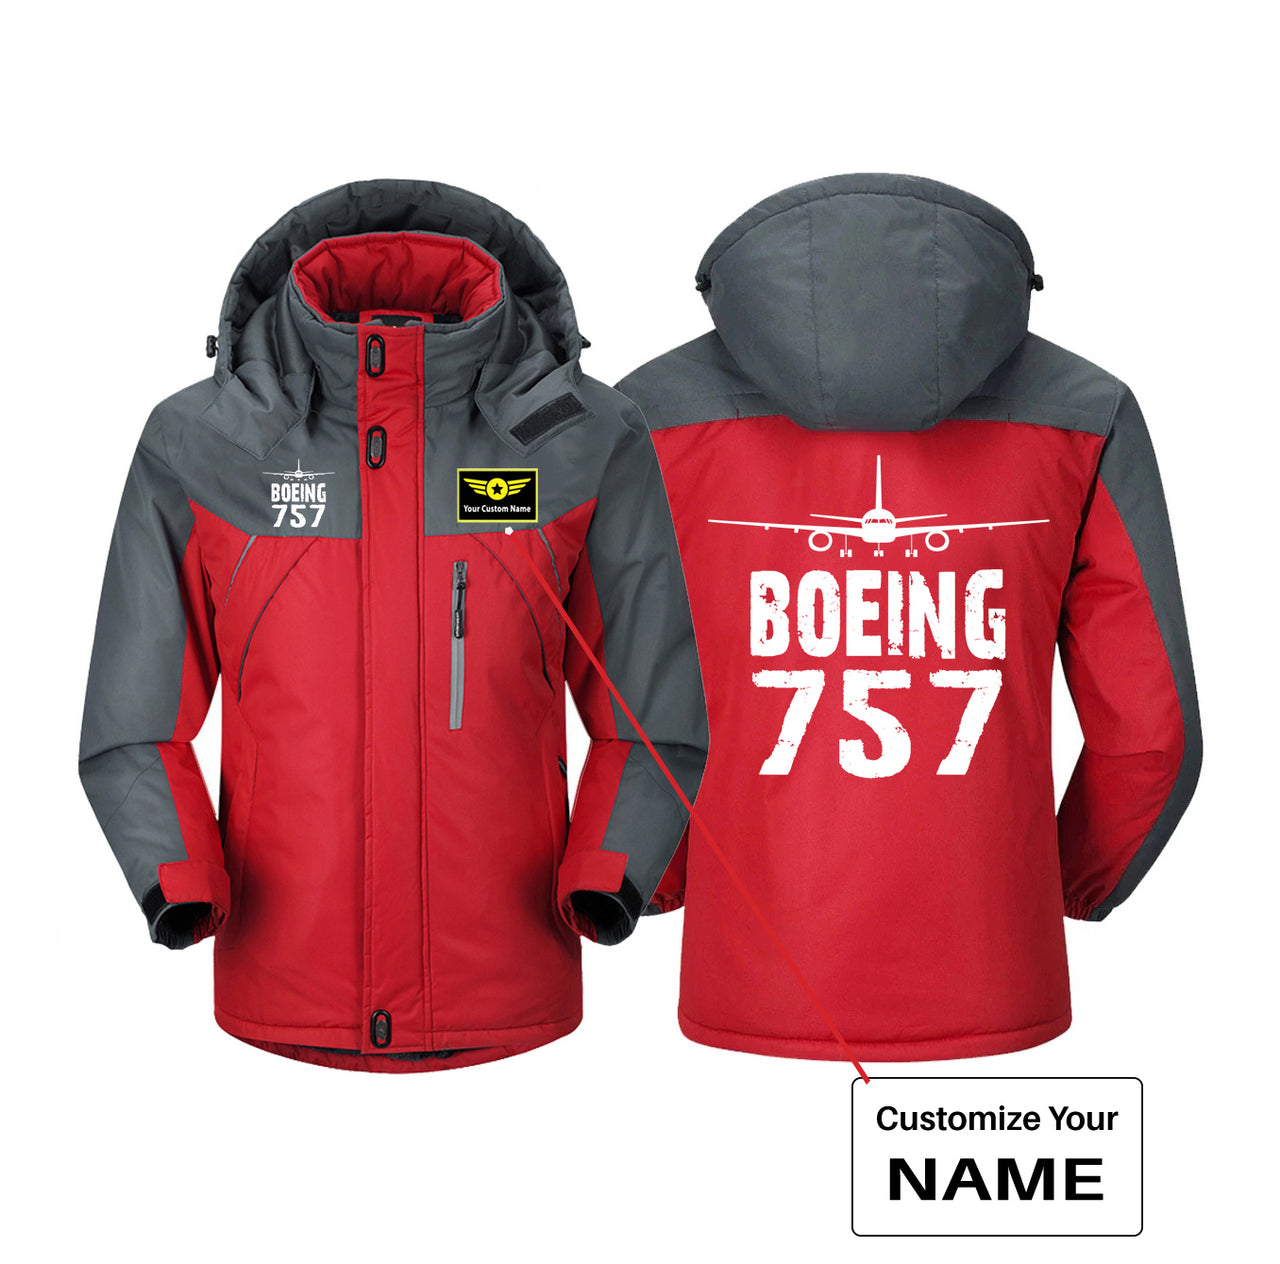 Boeing 757 & Plane Designed Thick Winter Jackets